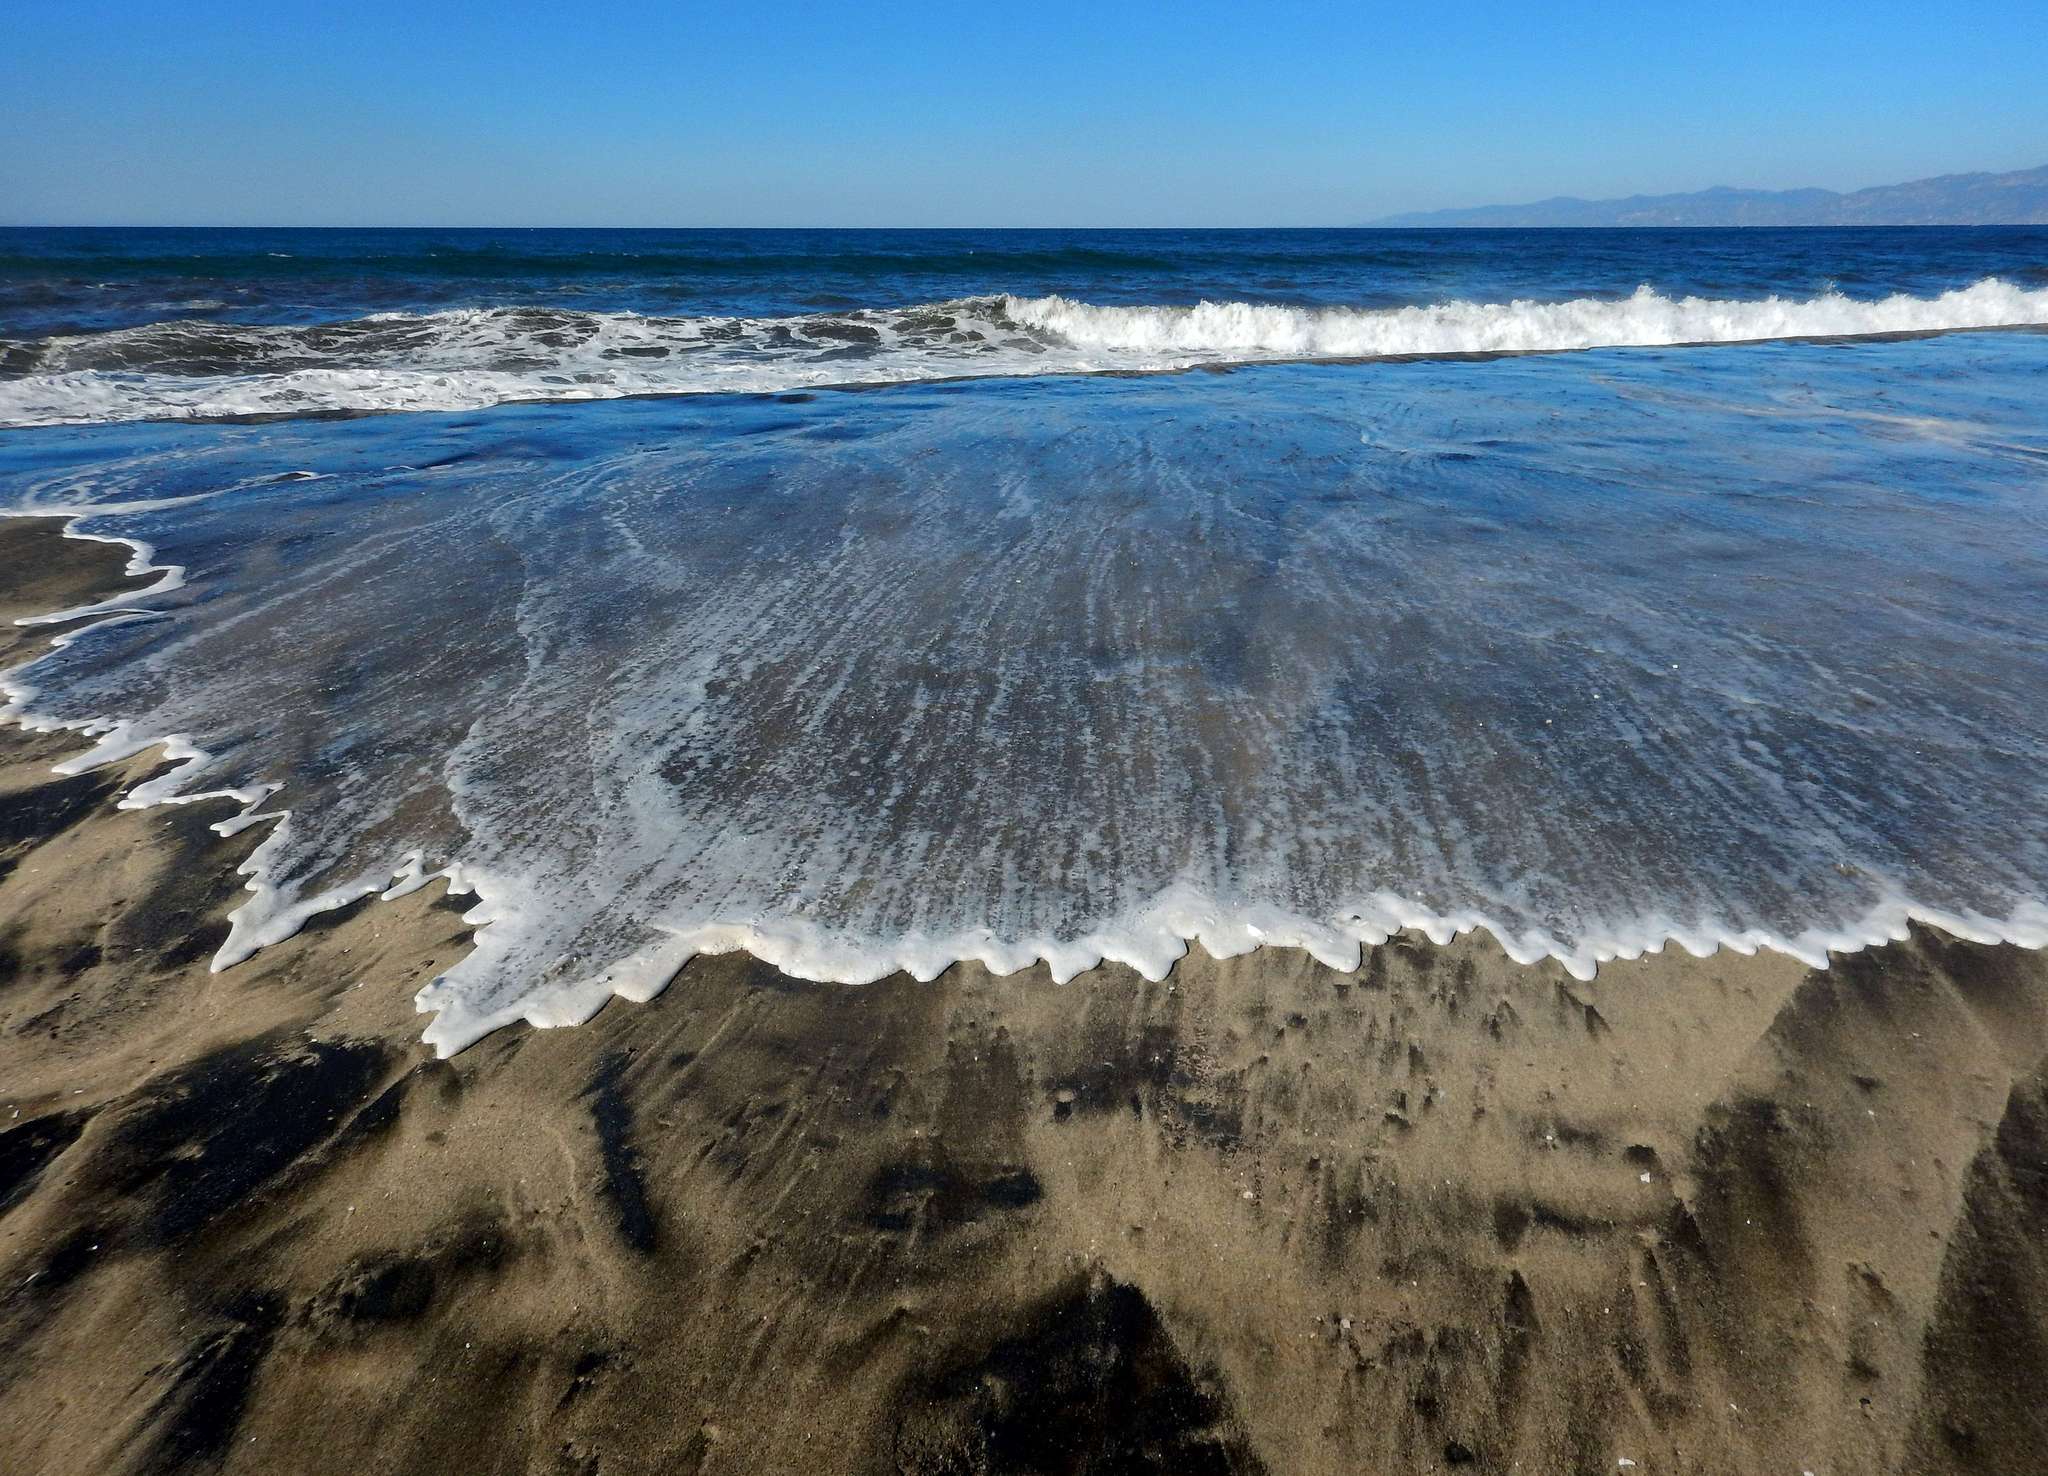 King tides will hit California coast, bringing possible flooding and